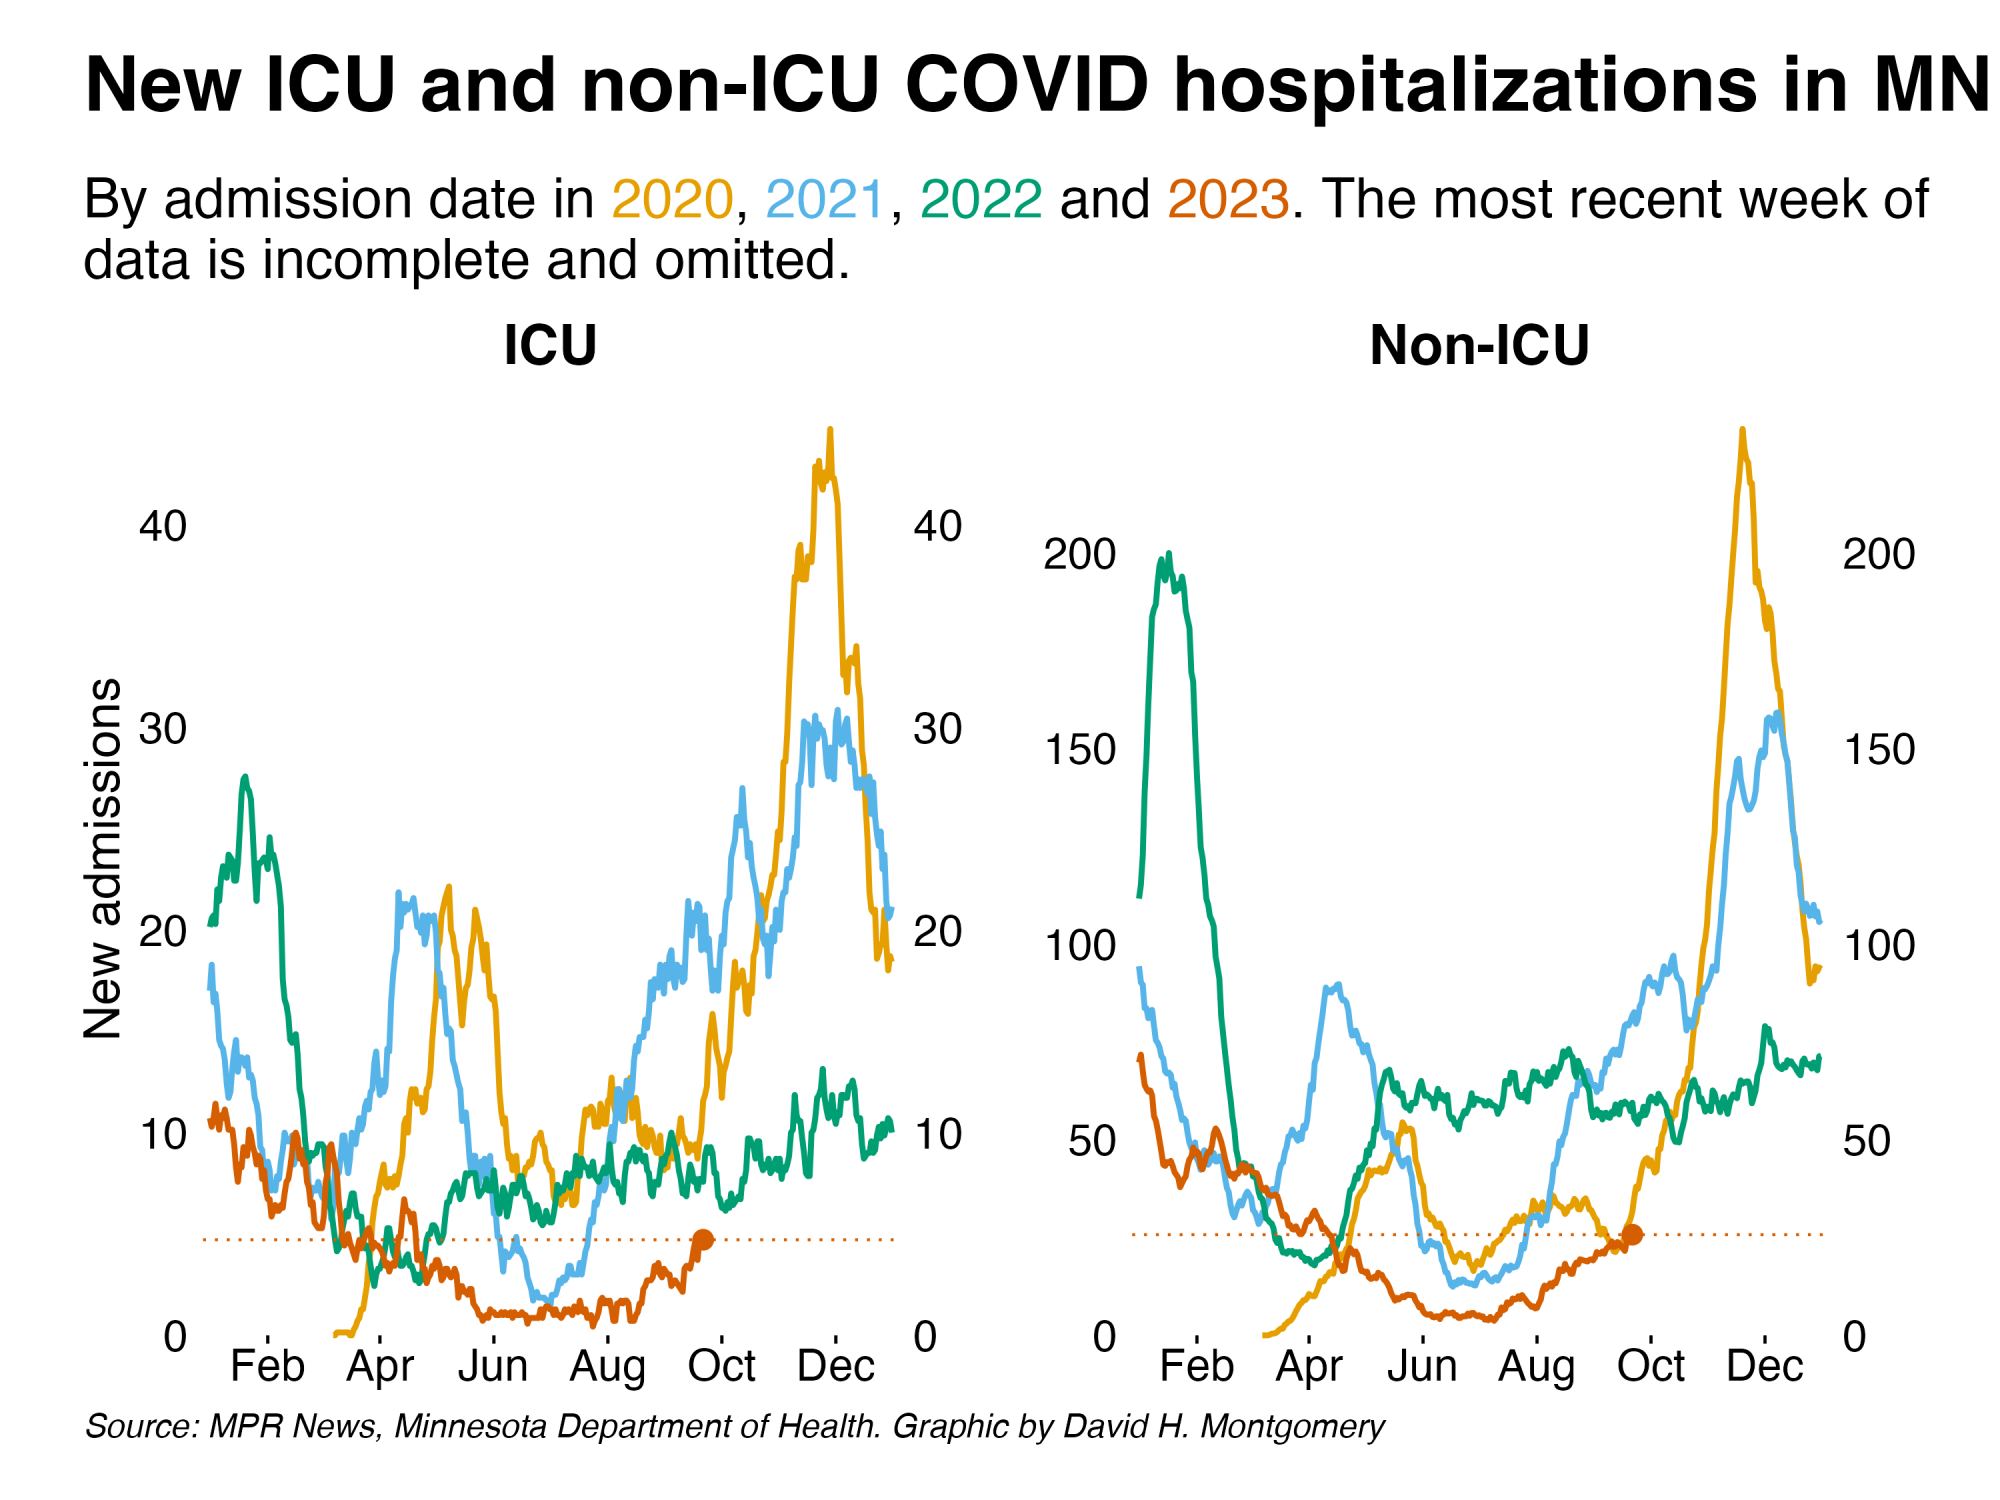 Graph showing change in COVID-19 ICU and non-ICU hospitalizations in Minnesota, by year